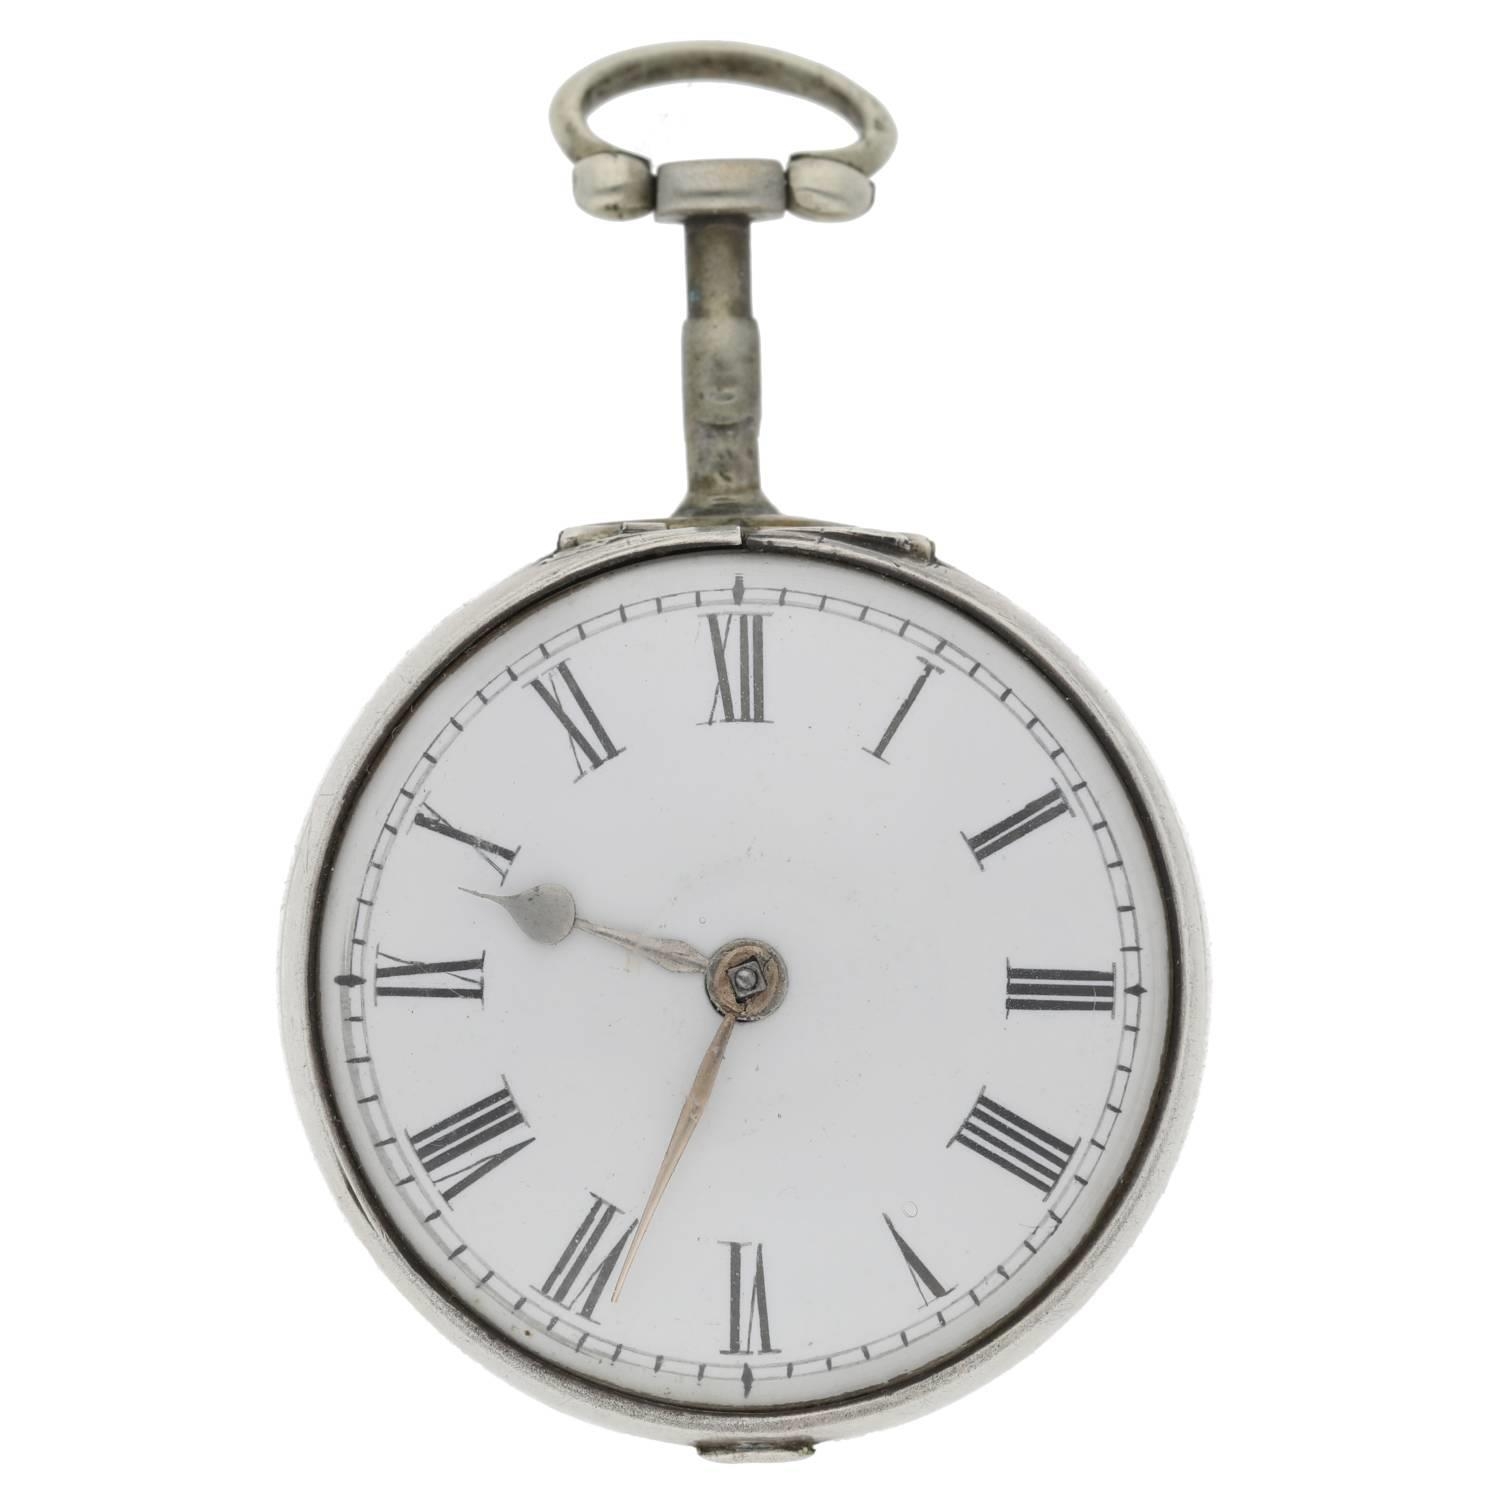 Chas. Robotham, Leicester - English 18th century silver pair cased verge pocket watch, London - Image 3 of 10